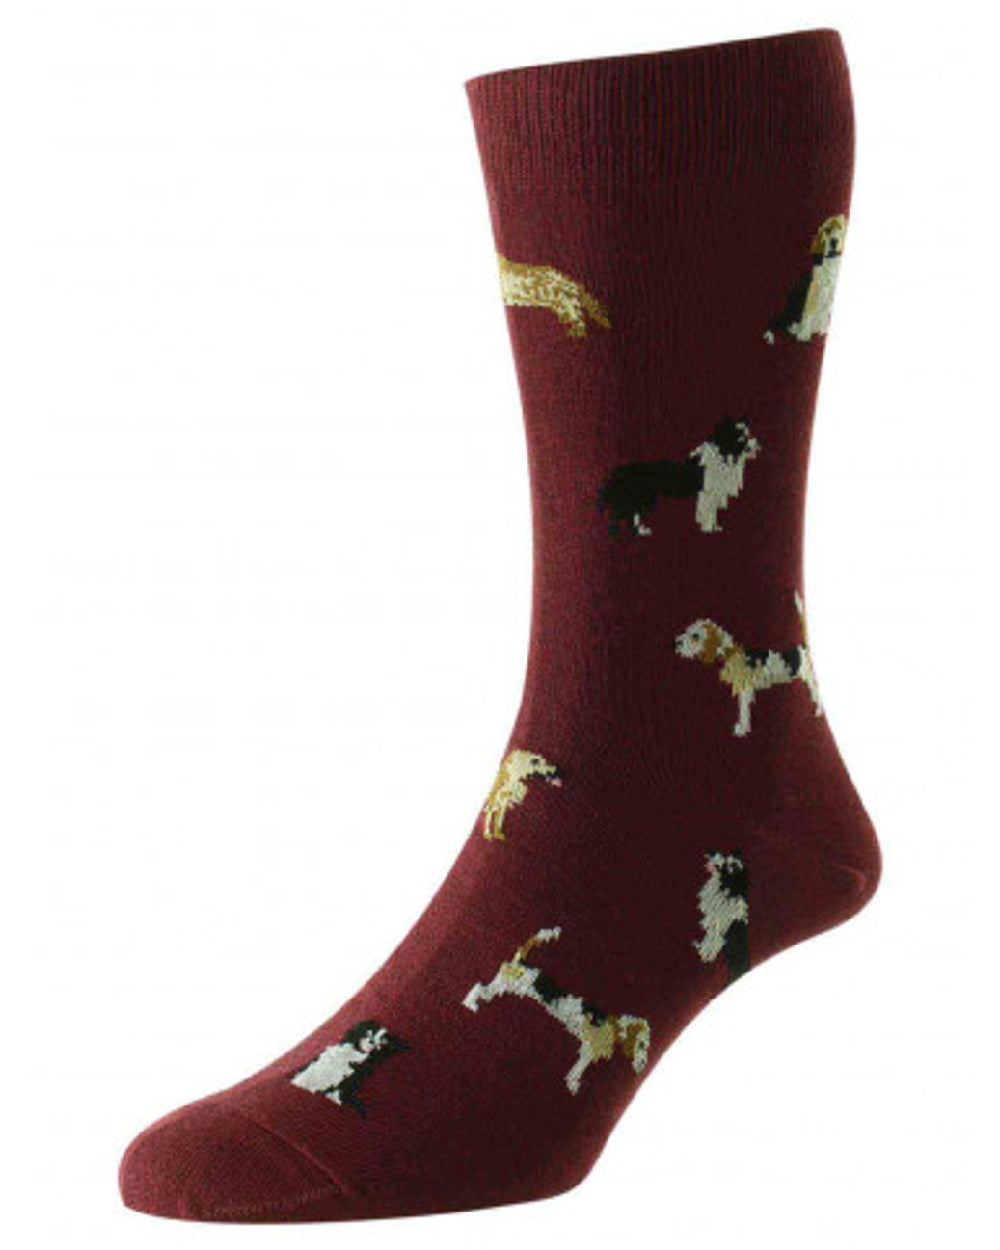 HJ Hall Mens Country Dogs Motif Cotton Rich Socks in Burgundy 